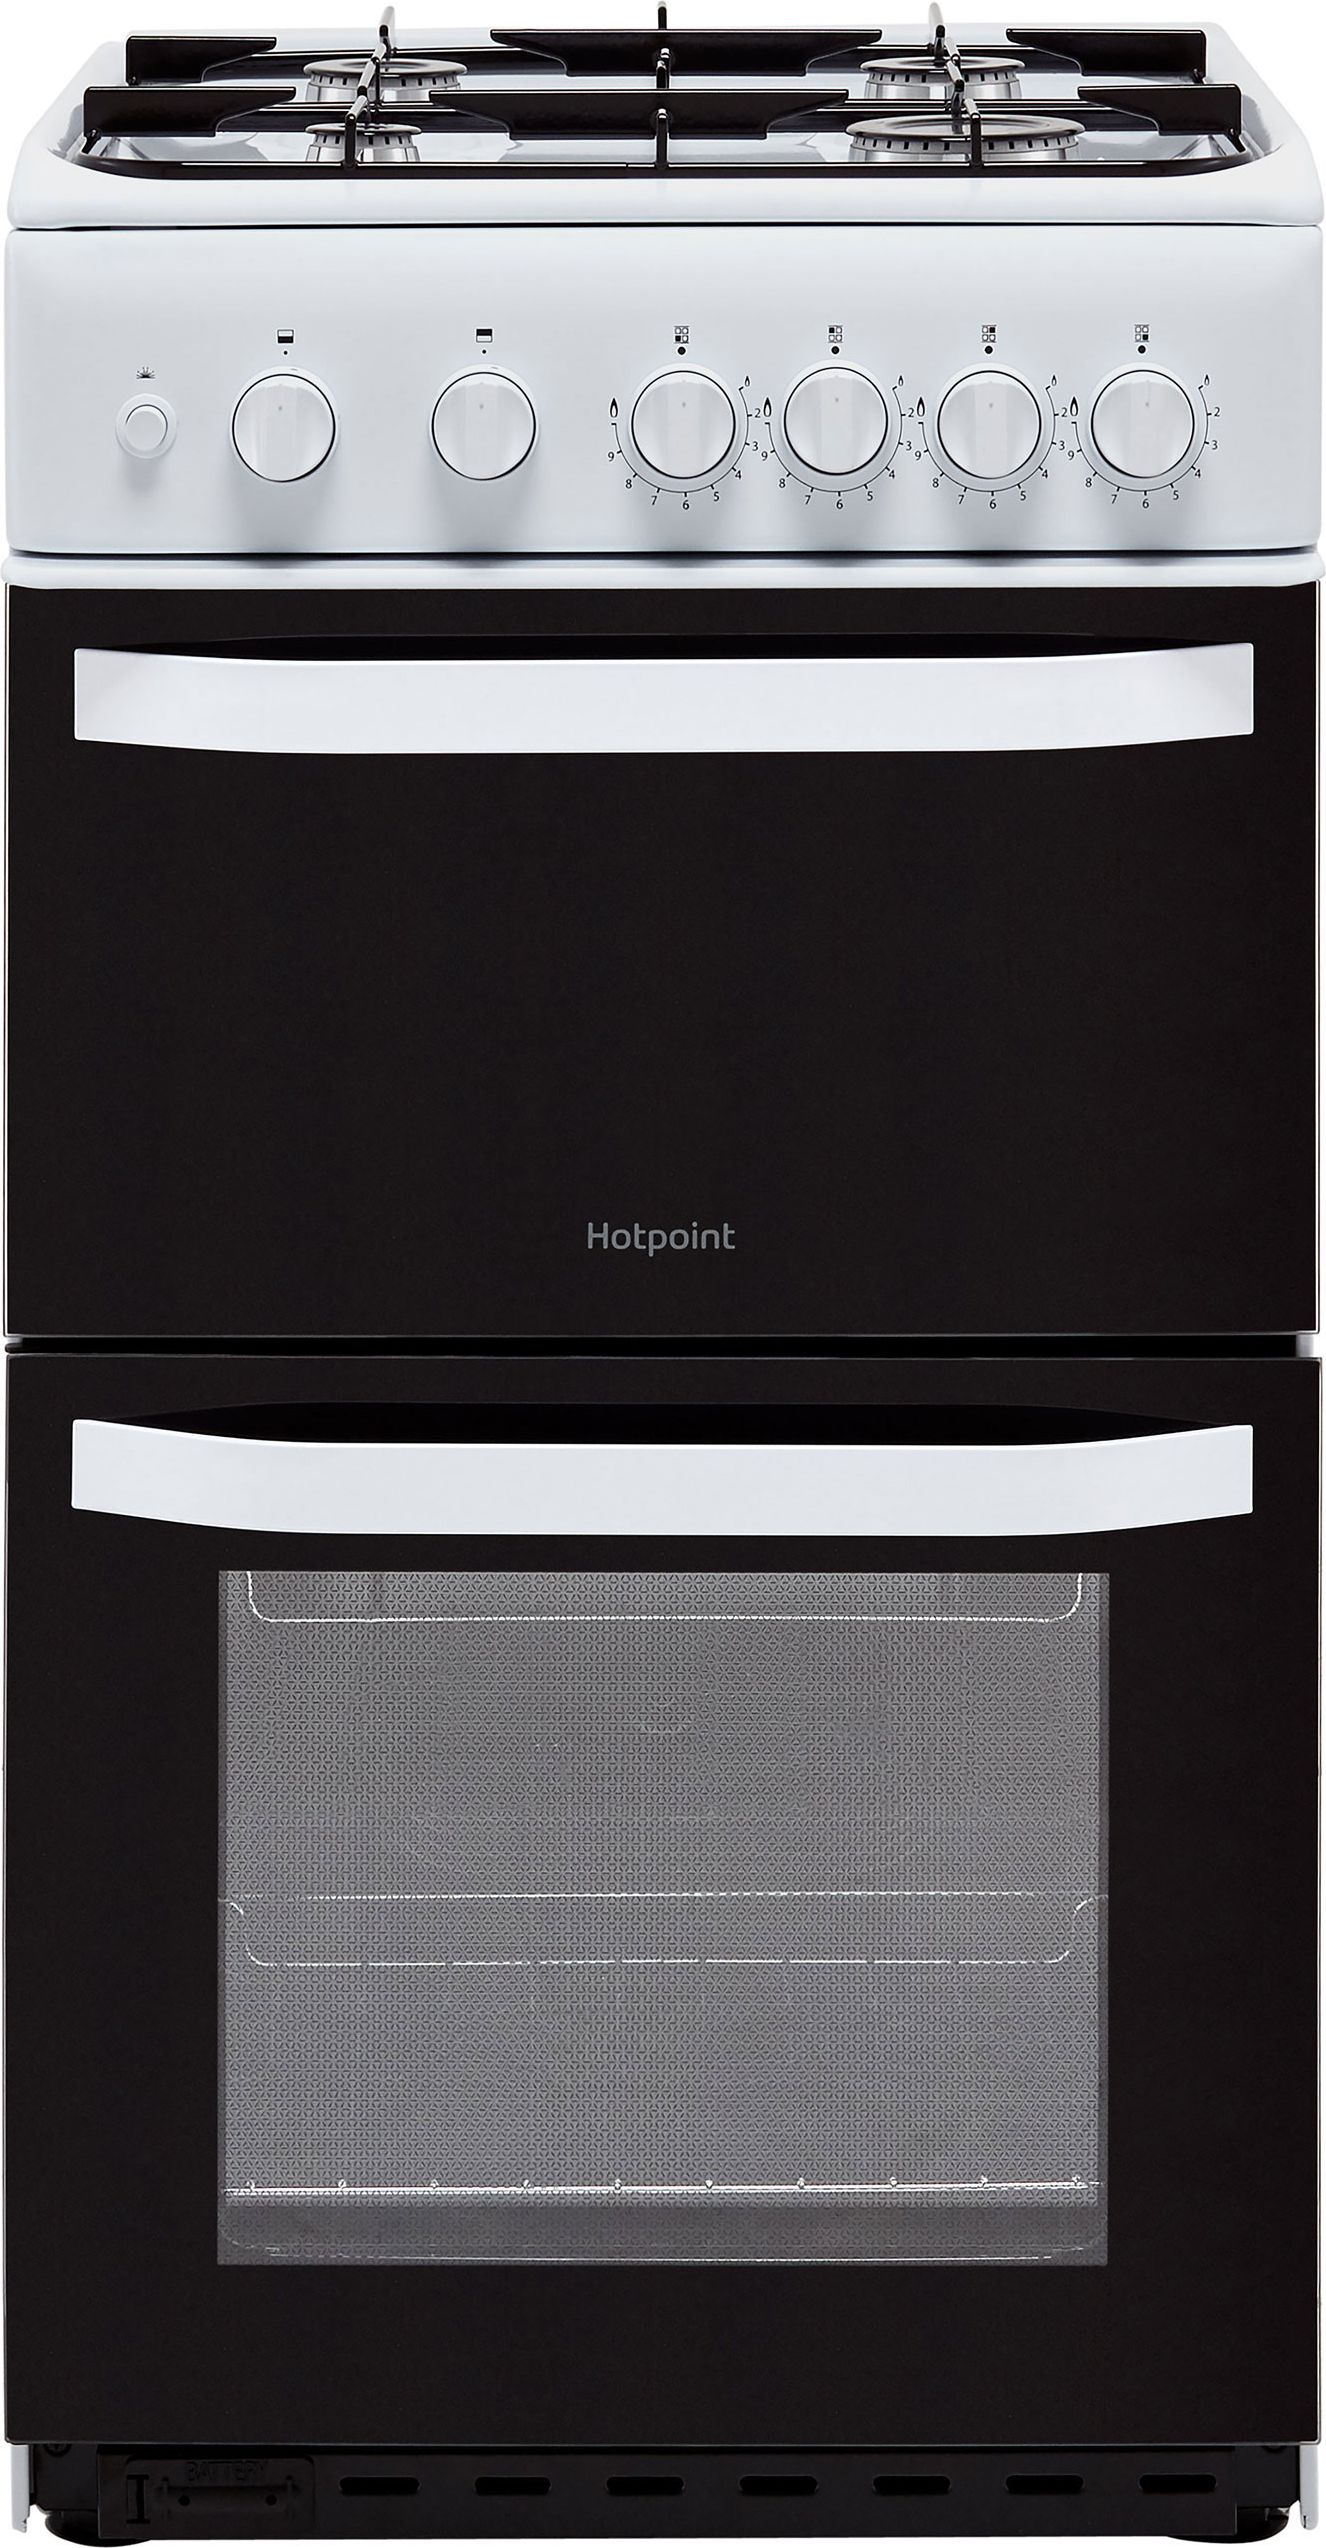 Hotpoint Cloe HD5G00KCW 50cm Freestanding Gas Cooker with Full Width Gas Grill - White - A Rated, White